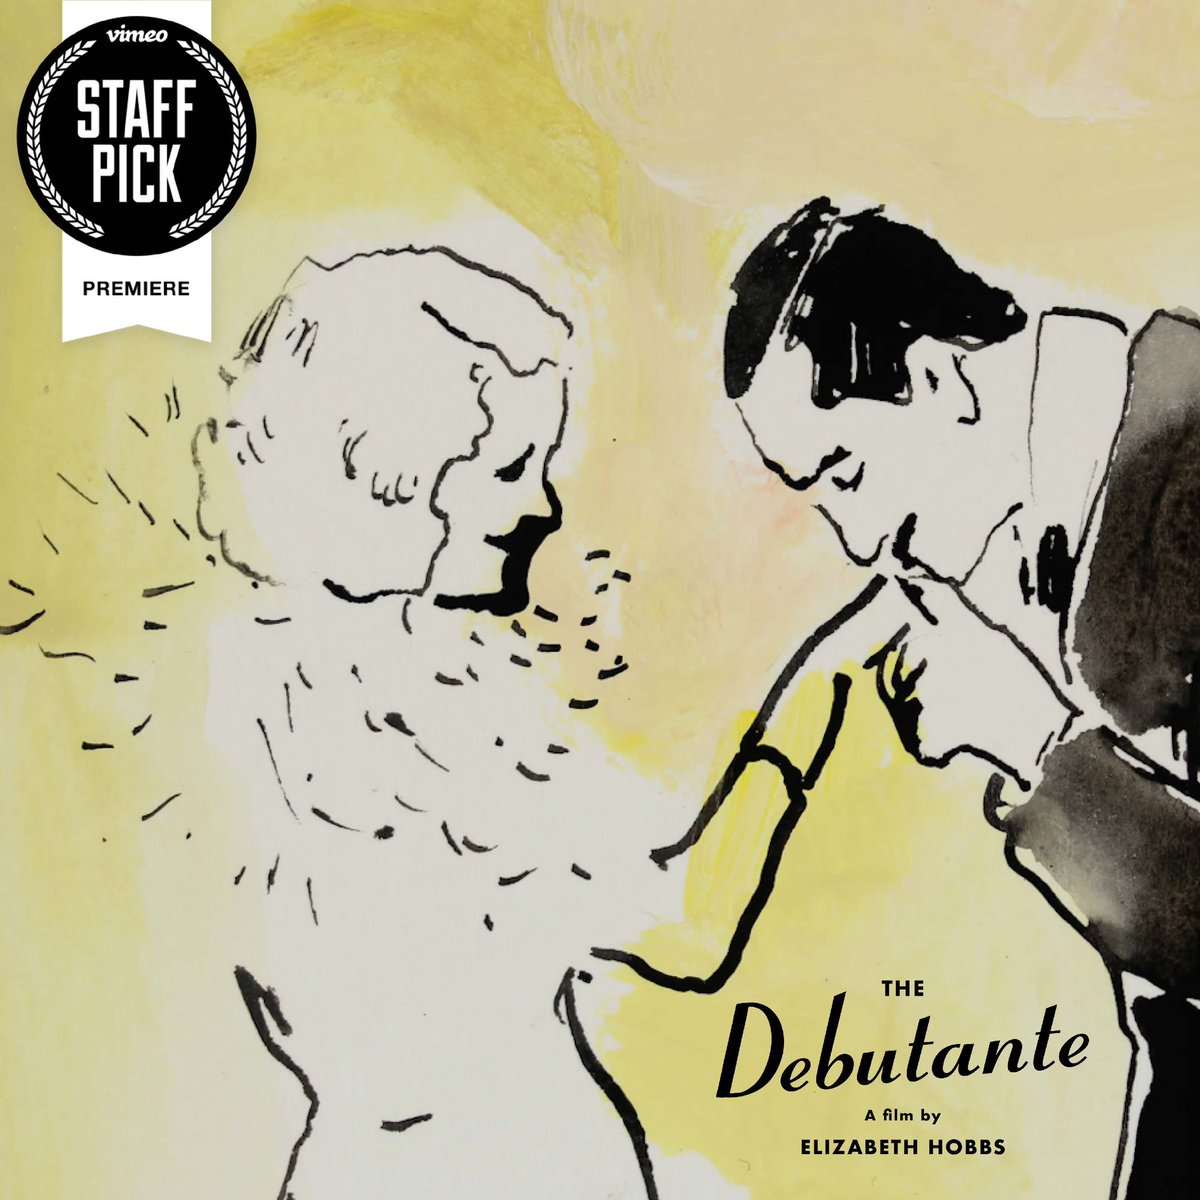 Marvel at the wild tale of ‘The Debutante’, as she and her friend the hyena create havoc at a dinner dance – @LizzyHobbs ‘The Debutante’ is now available to view on @vimeo #VimeoStaffPick vimeo.com/940848616 #TheDebutanteFilm @animateprojects #BFIBacked #NationalLottery